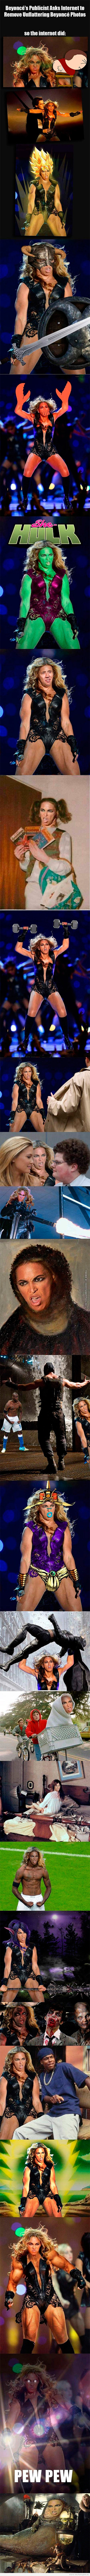 Funny Picture - The internet is unforgiving - Beyonce asks internet to remove picture